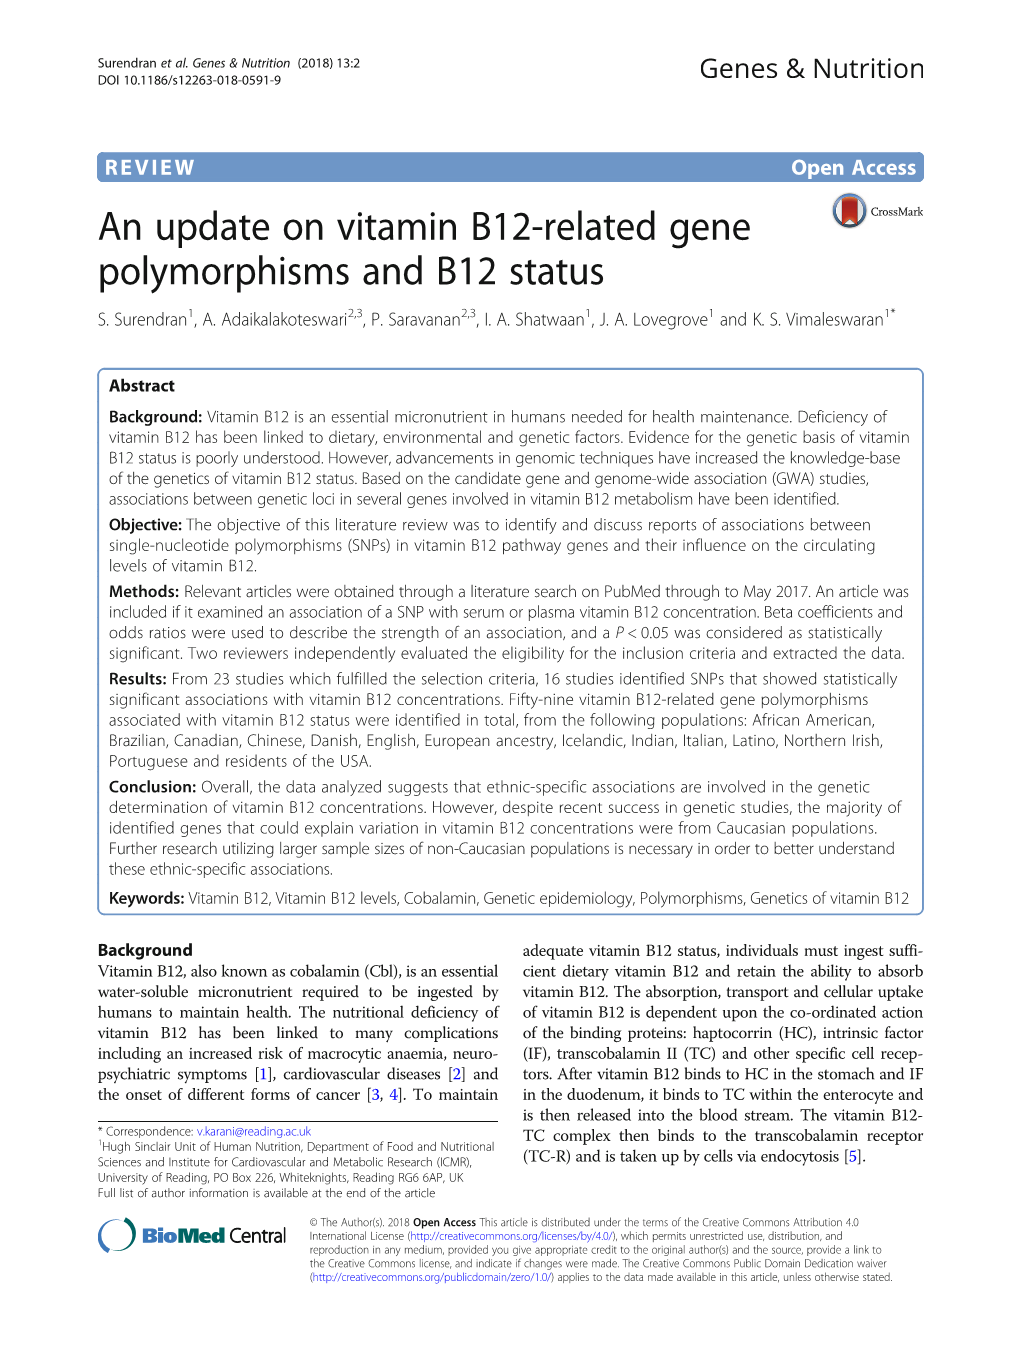 An Update on Vitamin B12-Related Gene Polymorphisms and B12 Status S